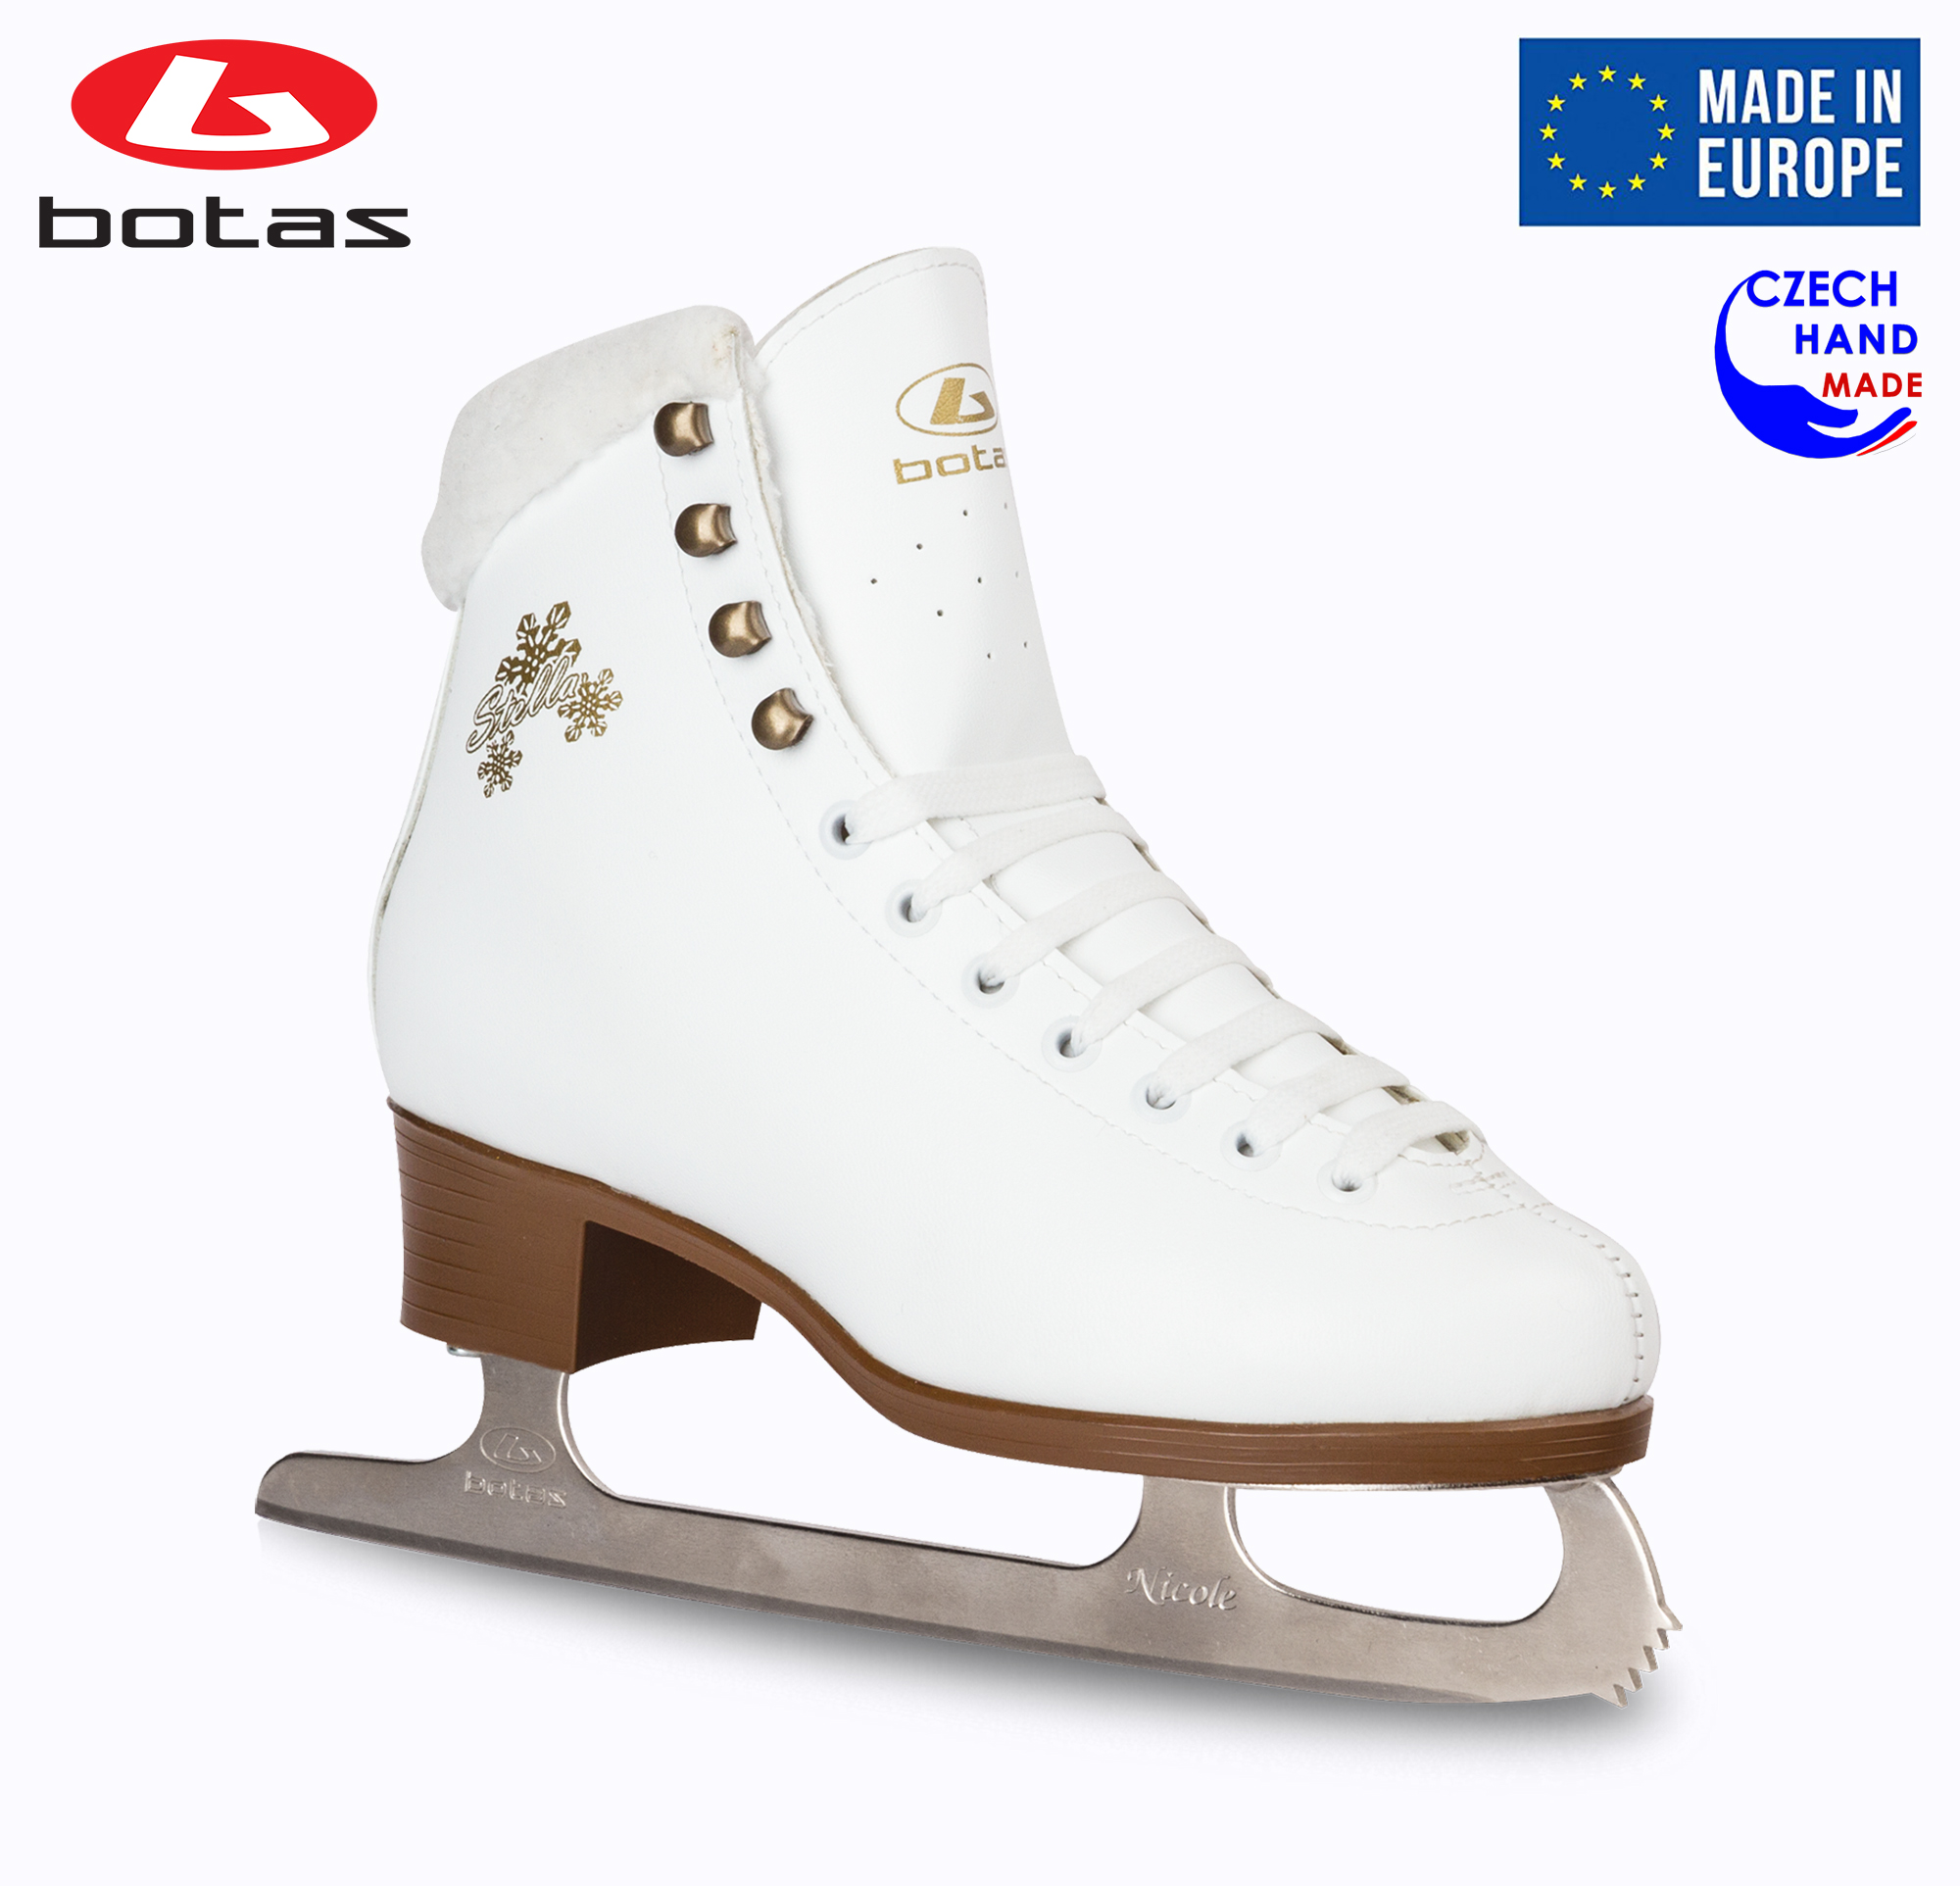 BOTAS - model: STELLA / Made in Europe (Czech Republic) / Innovated Elegant Figure Ice Skates for Girls, Kids / with Plush Collar / NICOLE blades / Color: White, Size: Kids 10 - image 1 of 6